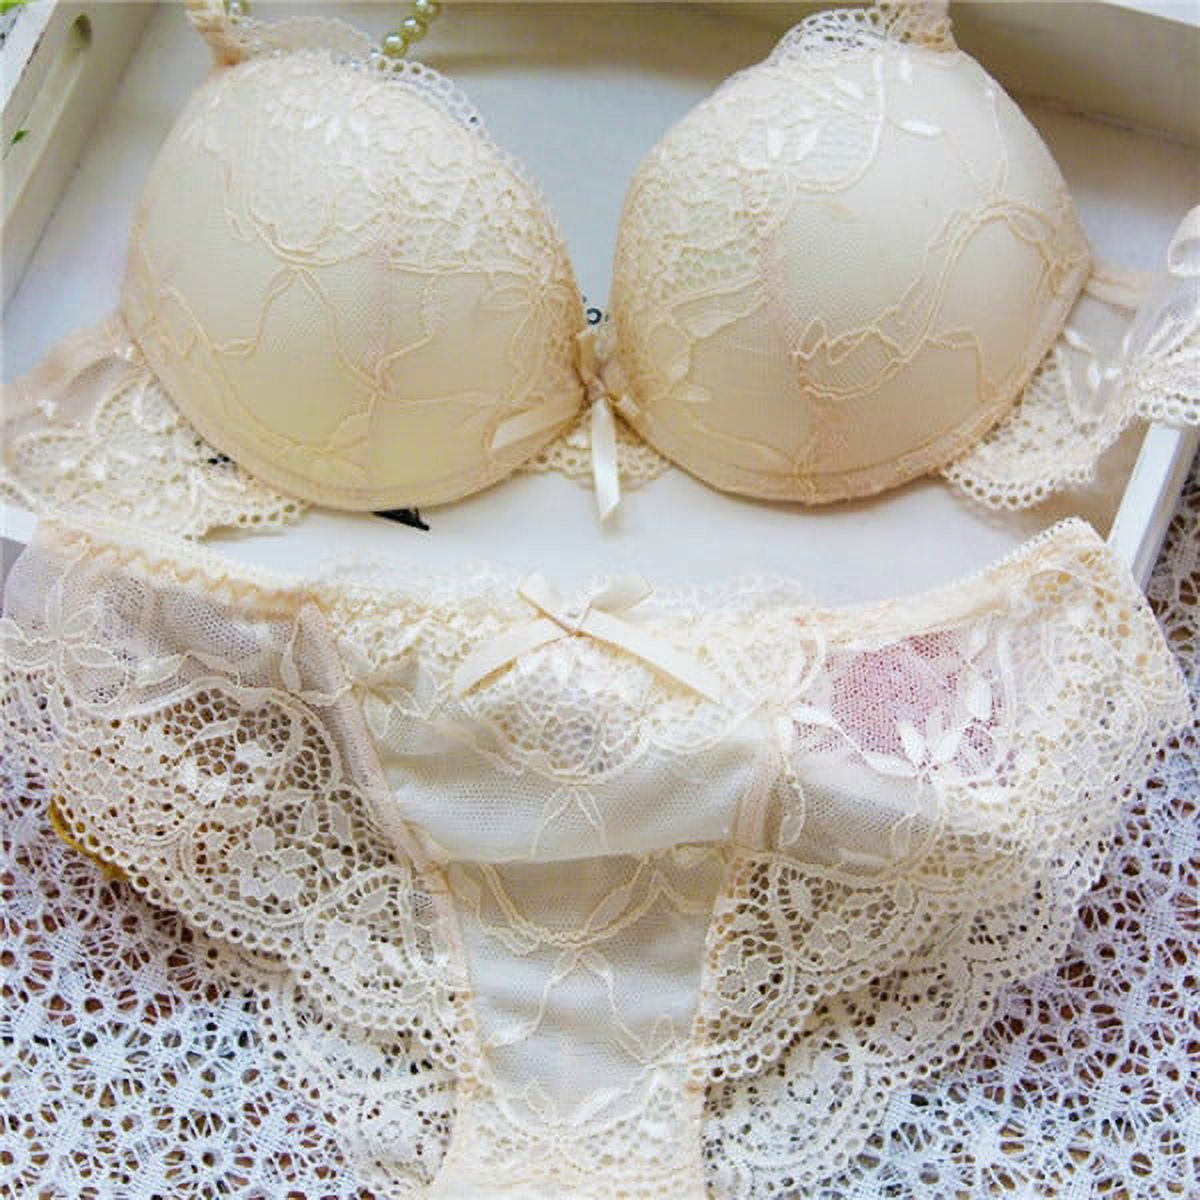 New Women Cute Sexy Underwear Satin Lace Embroidery Bra Sets With